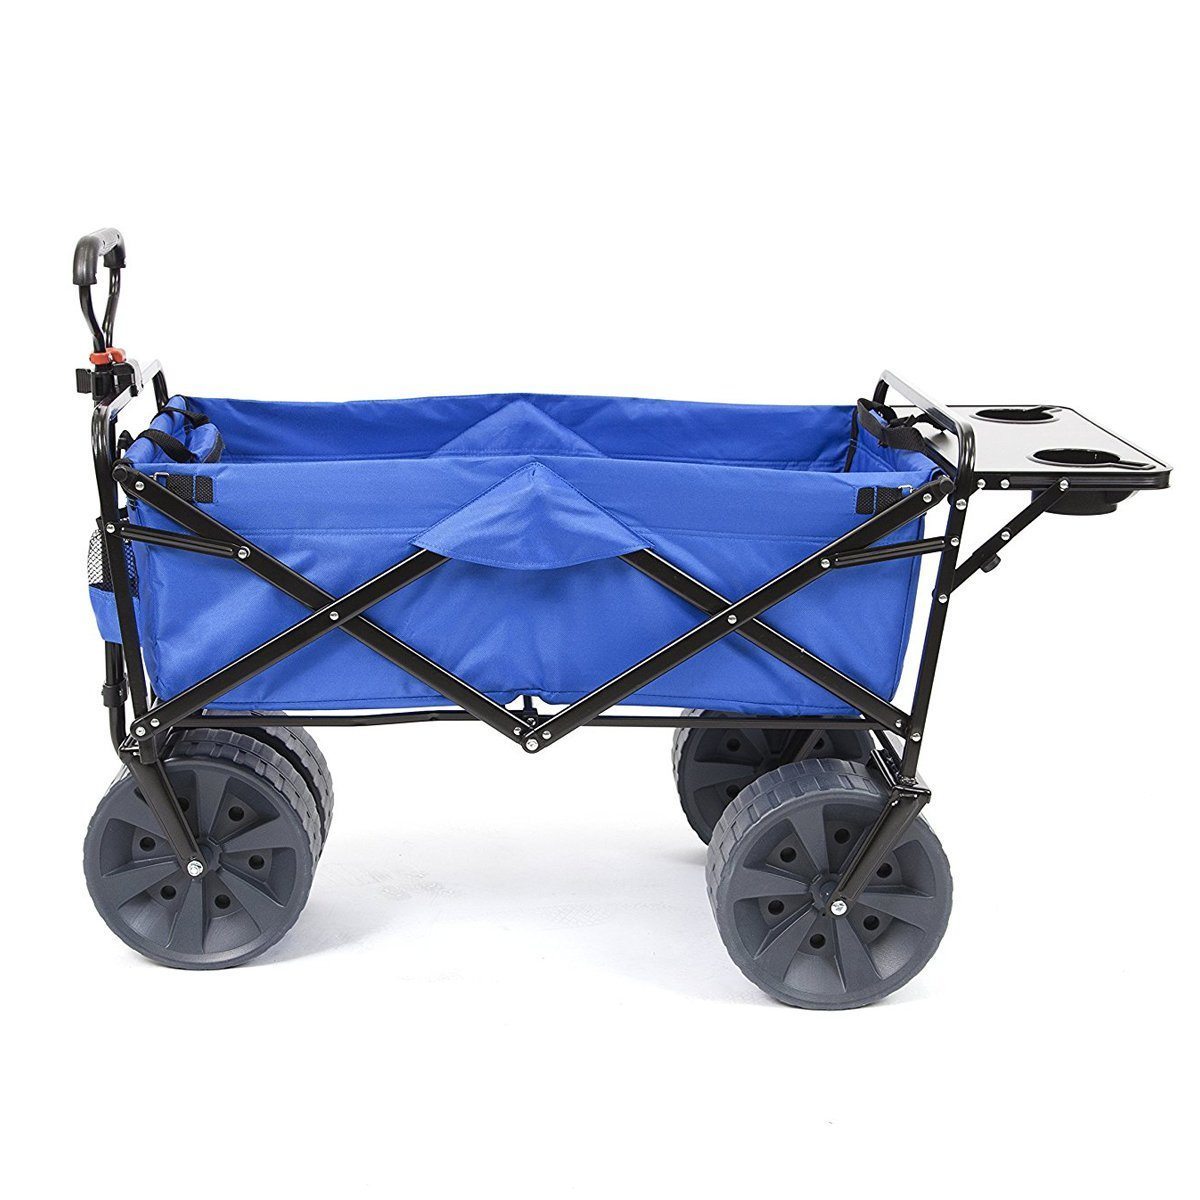 All-Terrain Beach Wagon By Mac Sports. With Side Table.